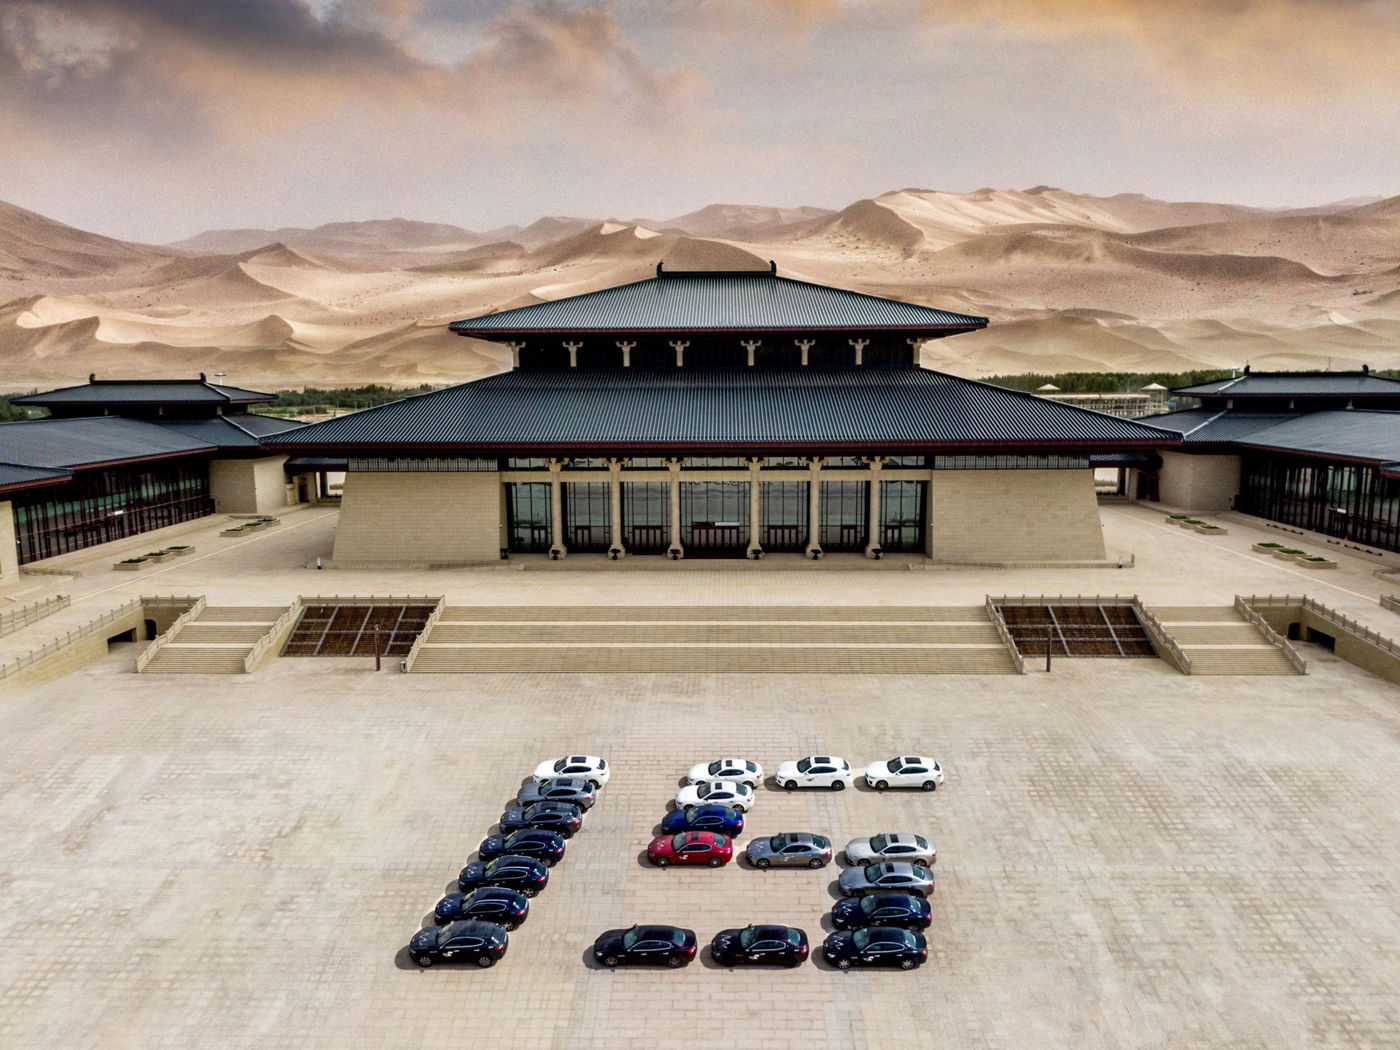 The Maserati fleet at the Dunhuang International Conference Center_1